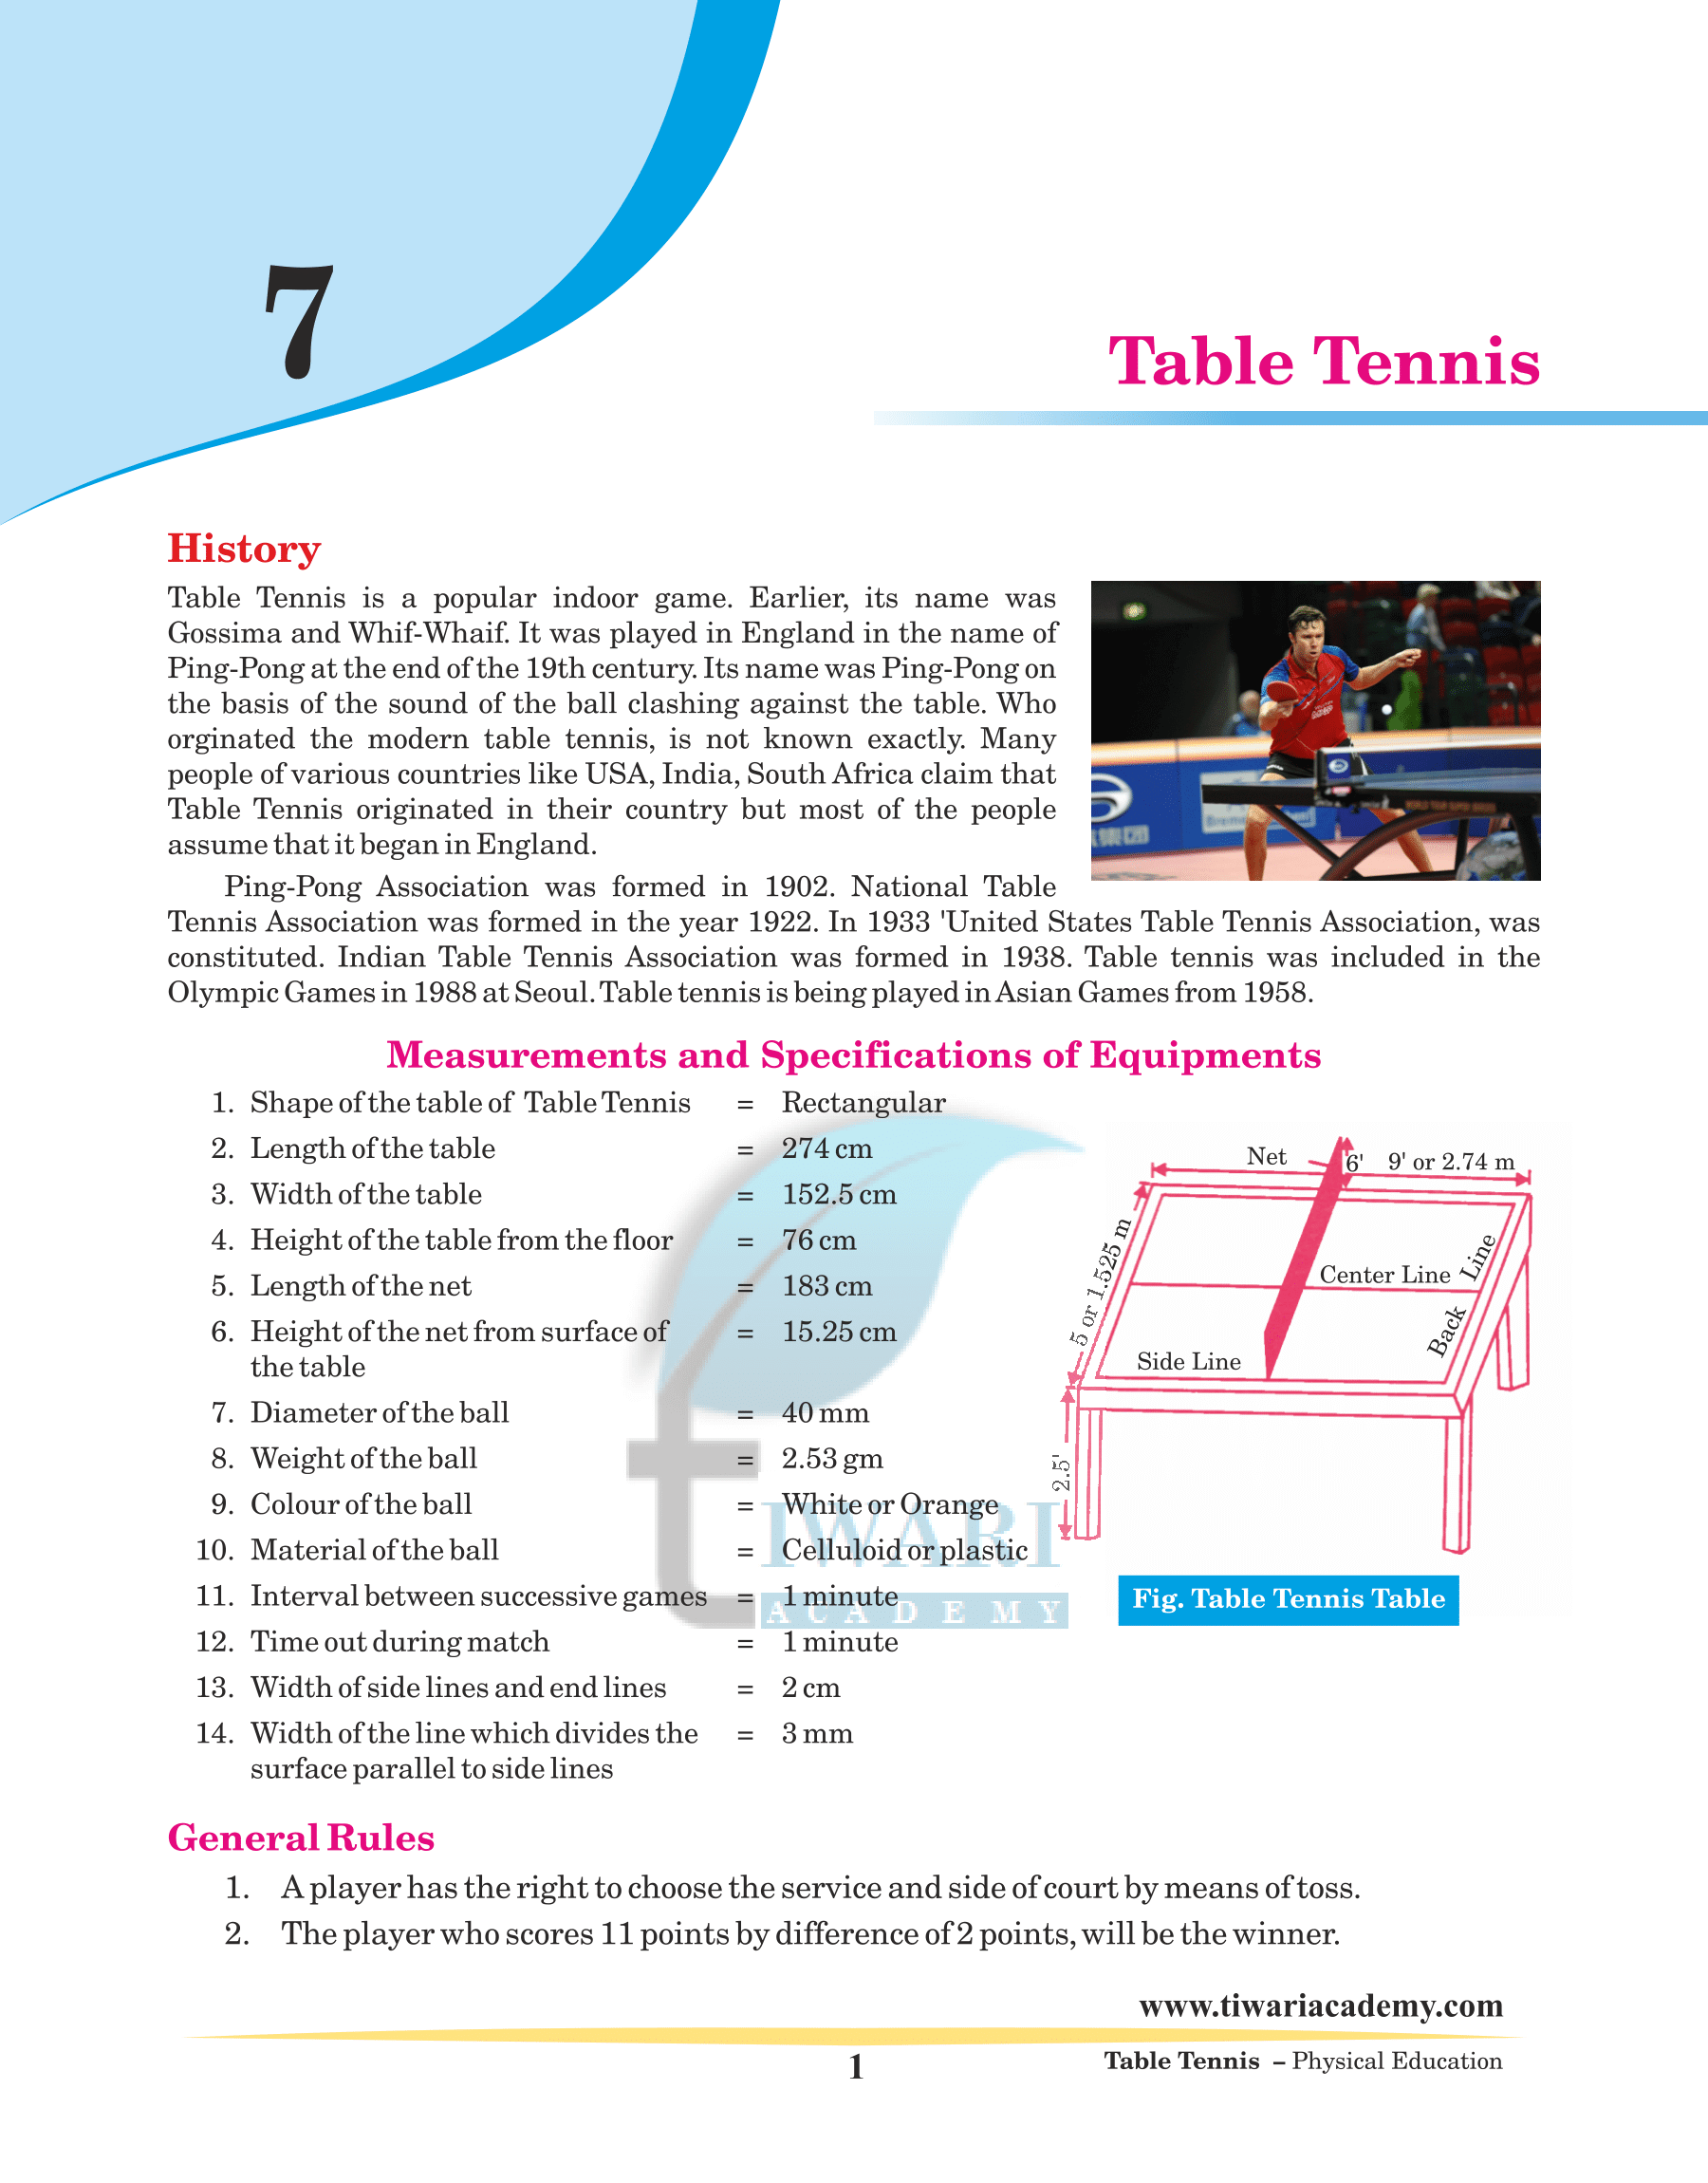 Table Tennis events